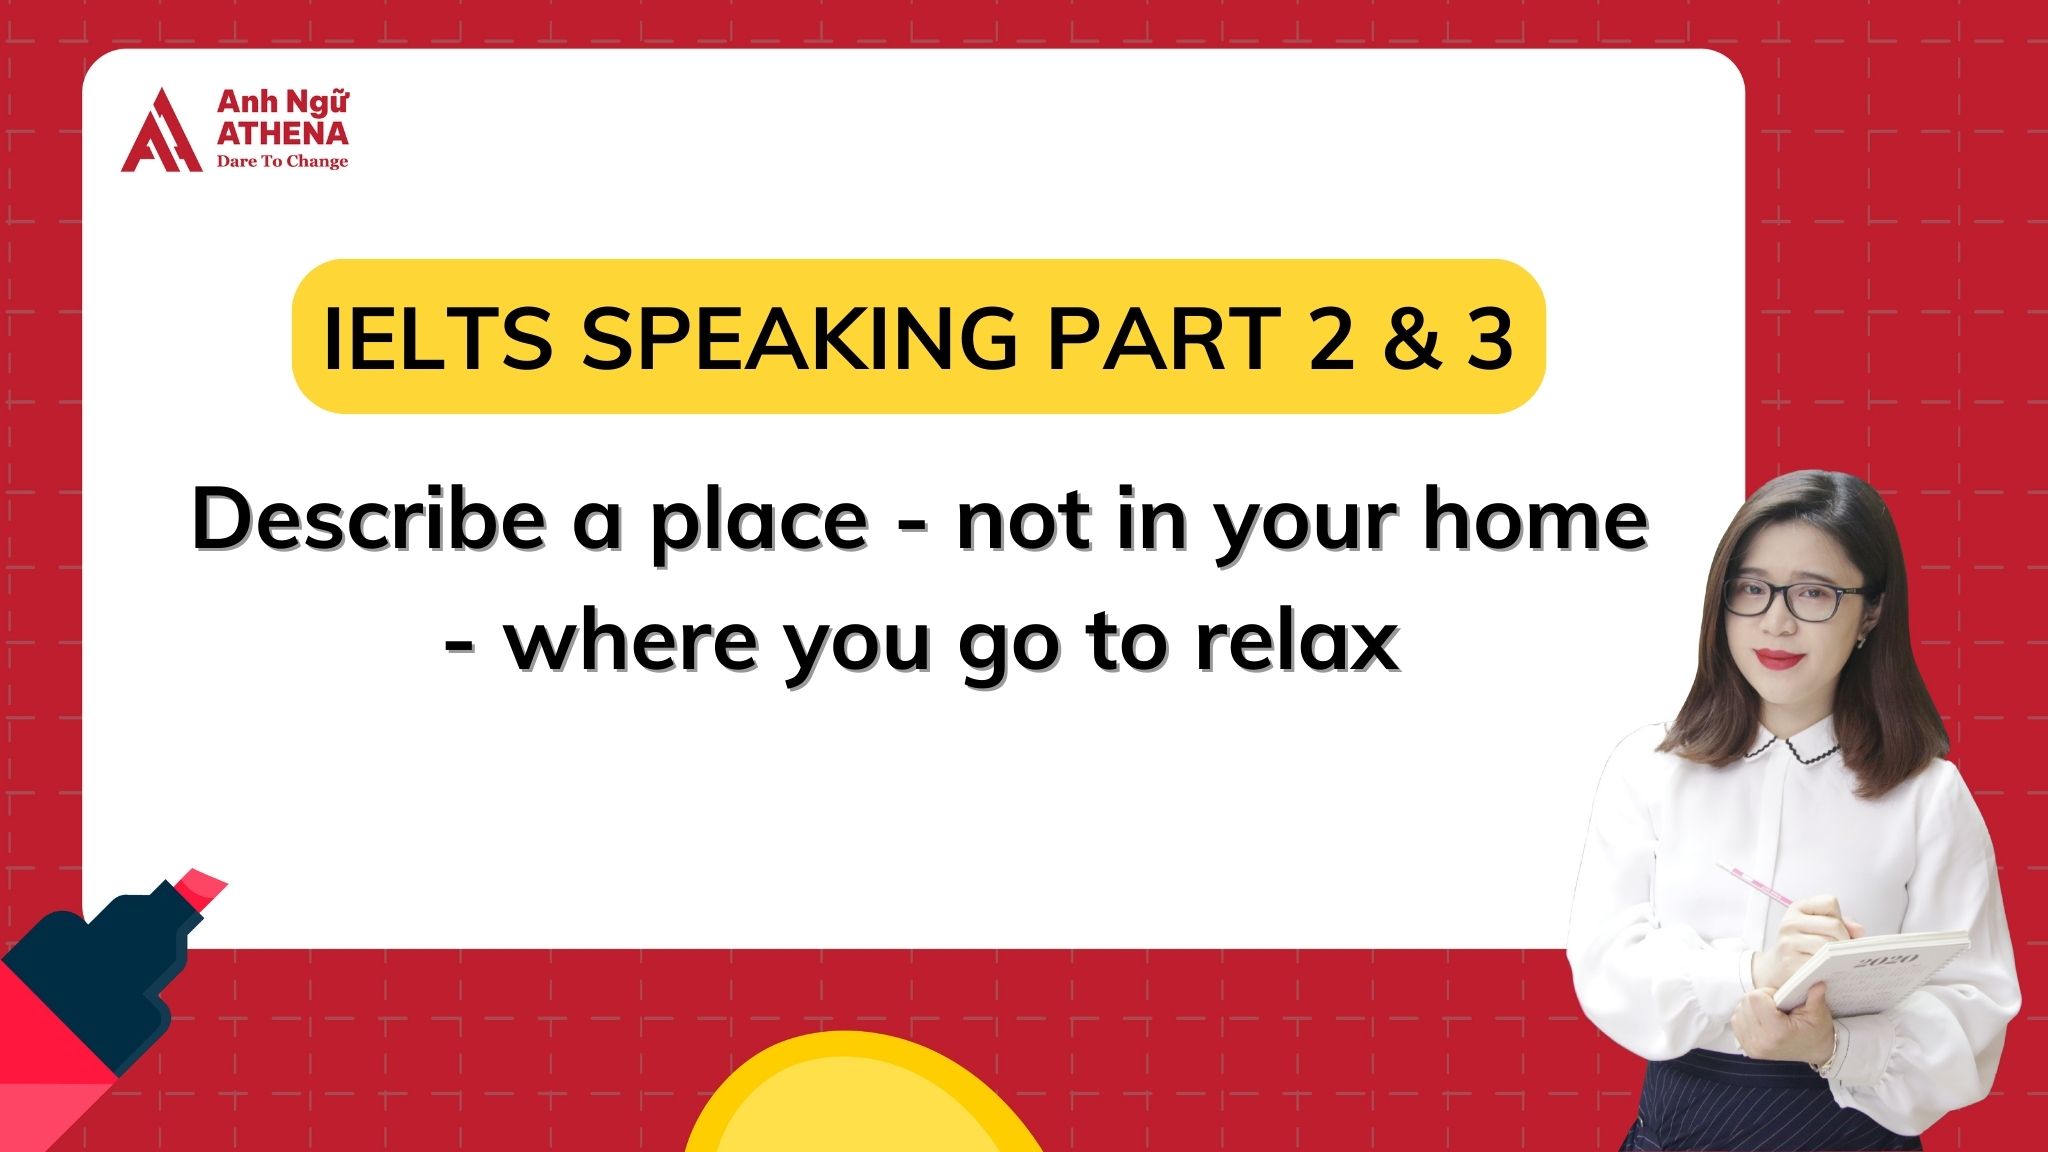 BÀI MẪU IELTS SPEAKING PART 2 & 3 - TOPIC: Describe a place - not in your home - where you go to relax